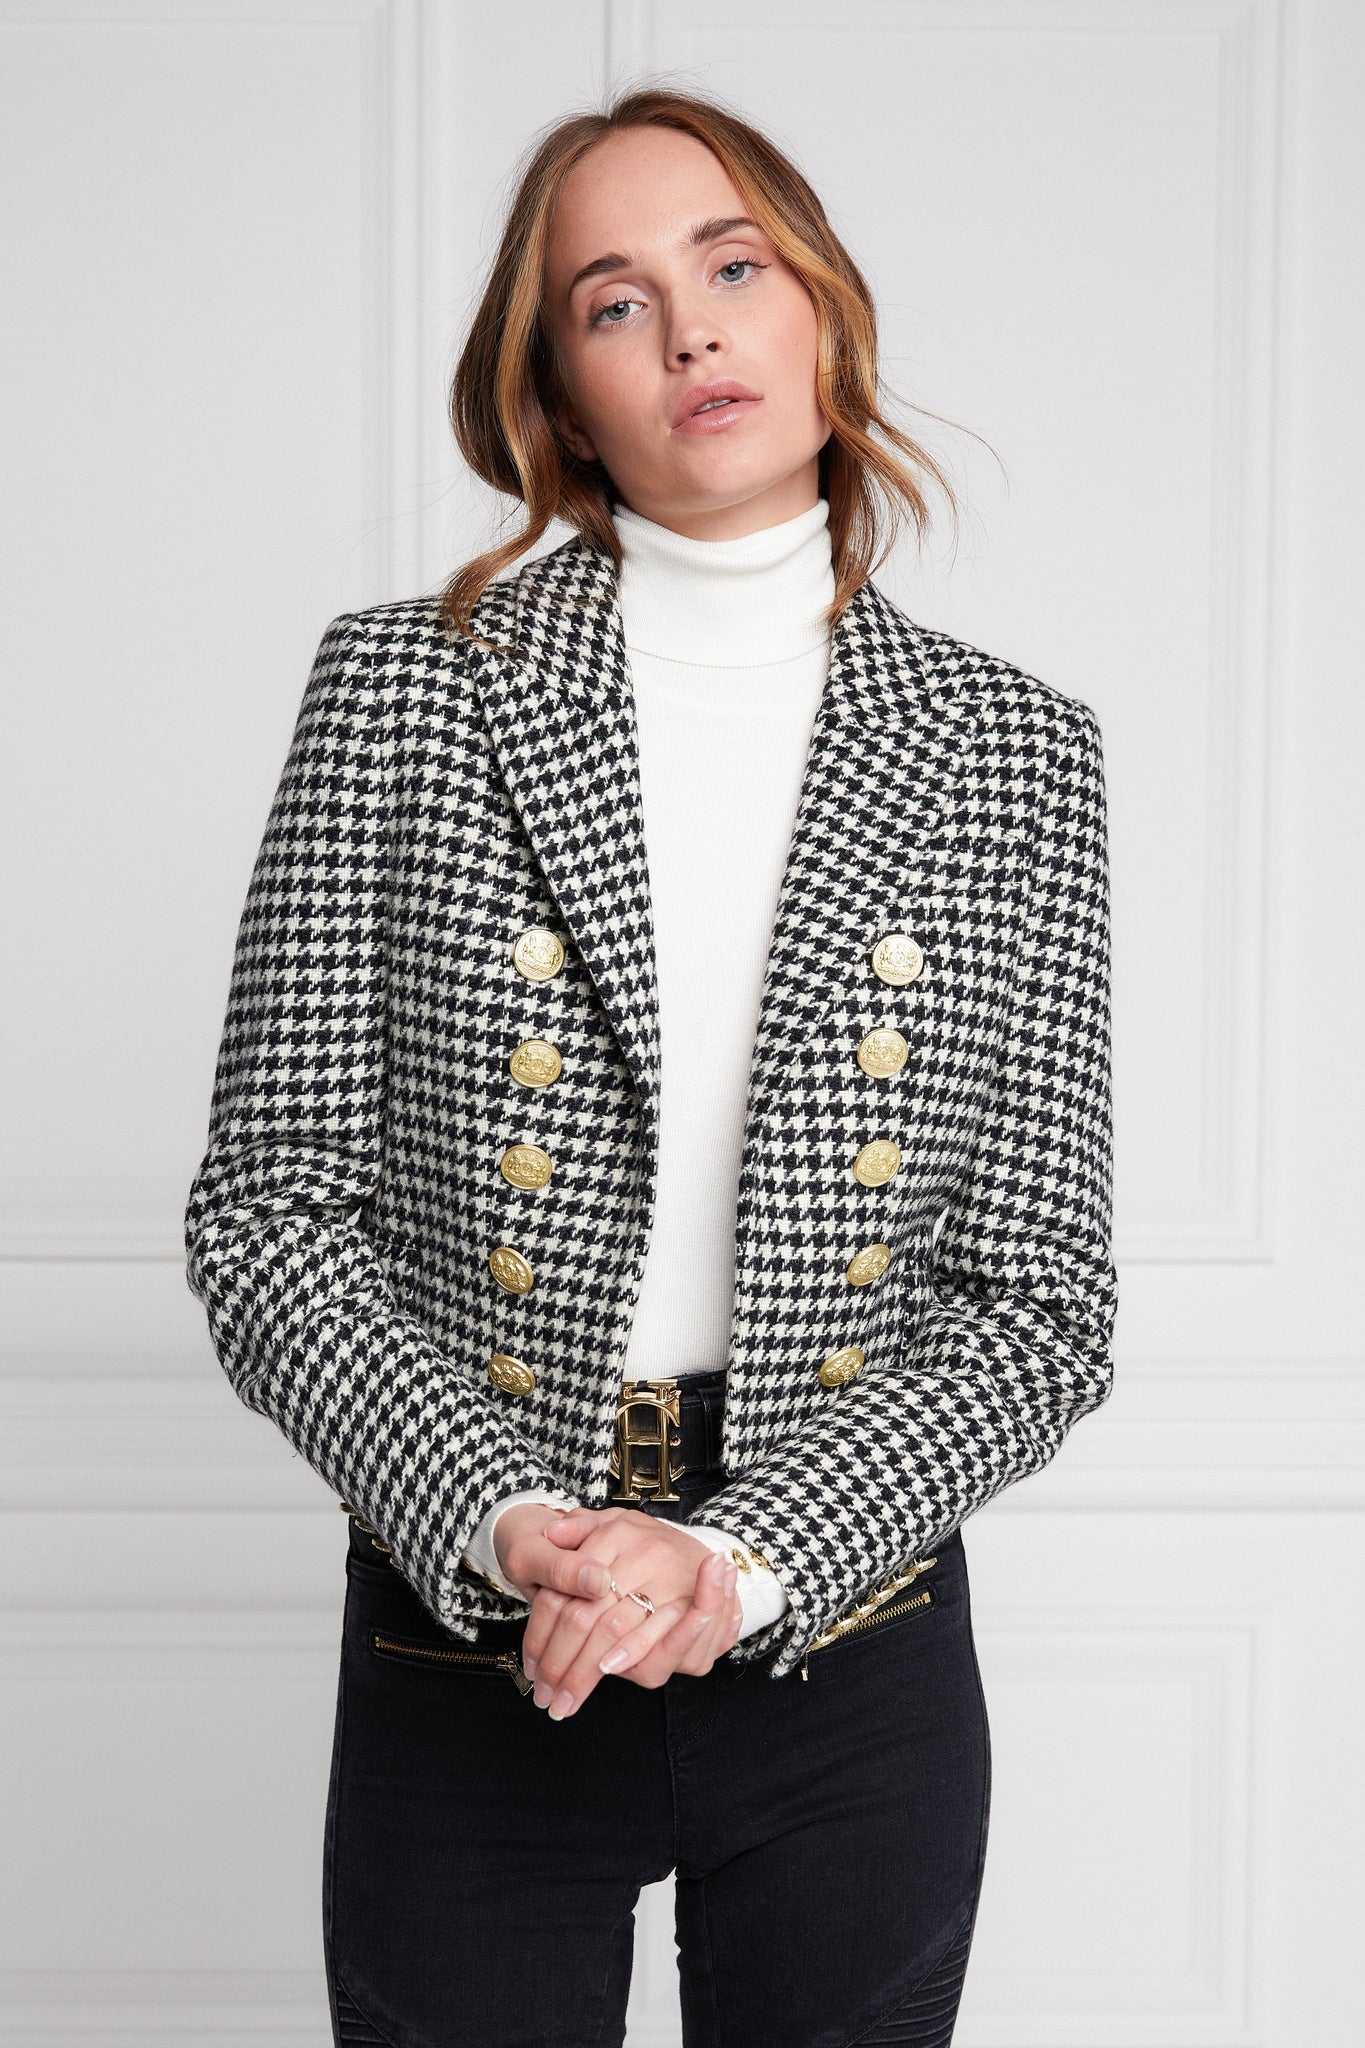 British made tailored cropped jacket in black and white houndstooth with welt pockets and gold button detail down the front and on sleeves